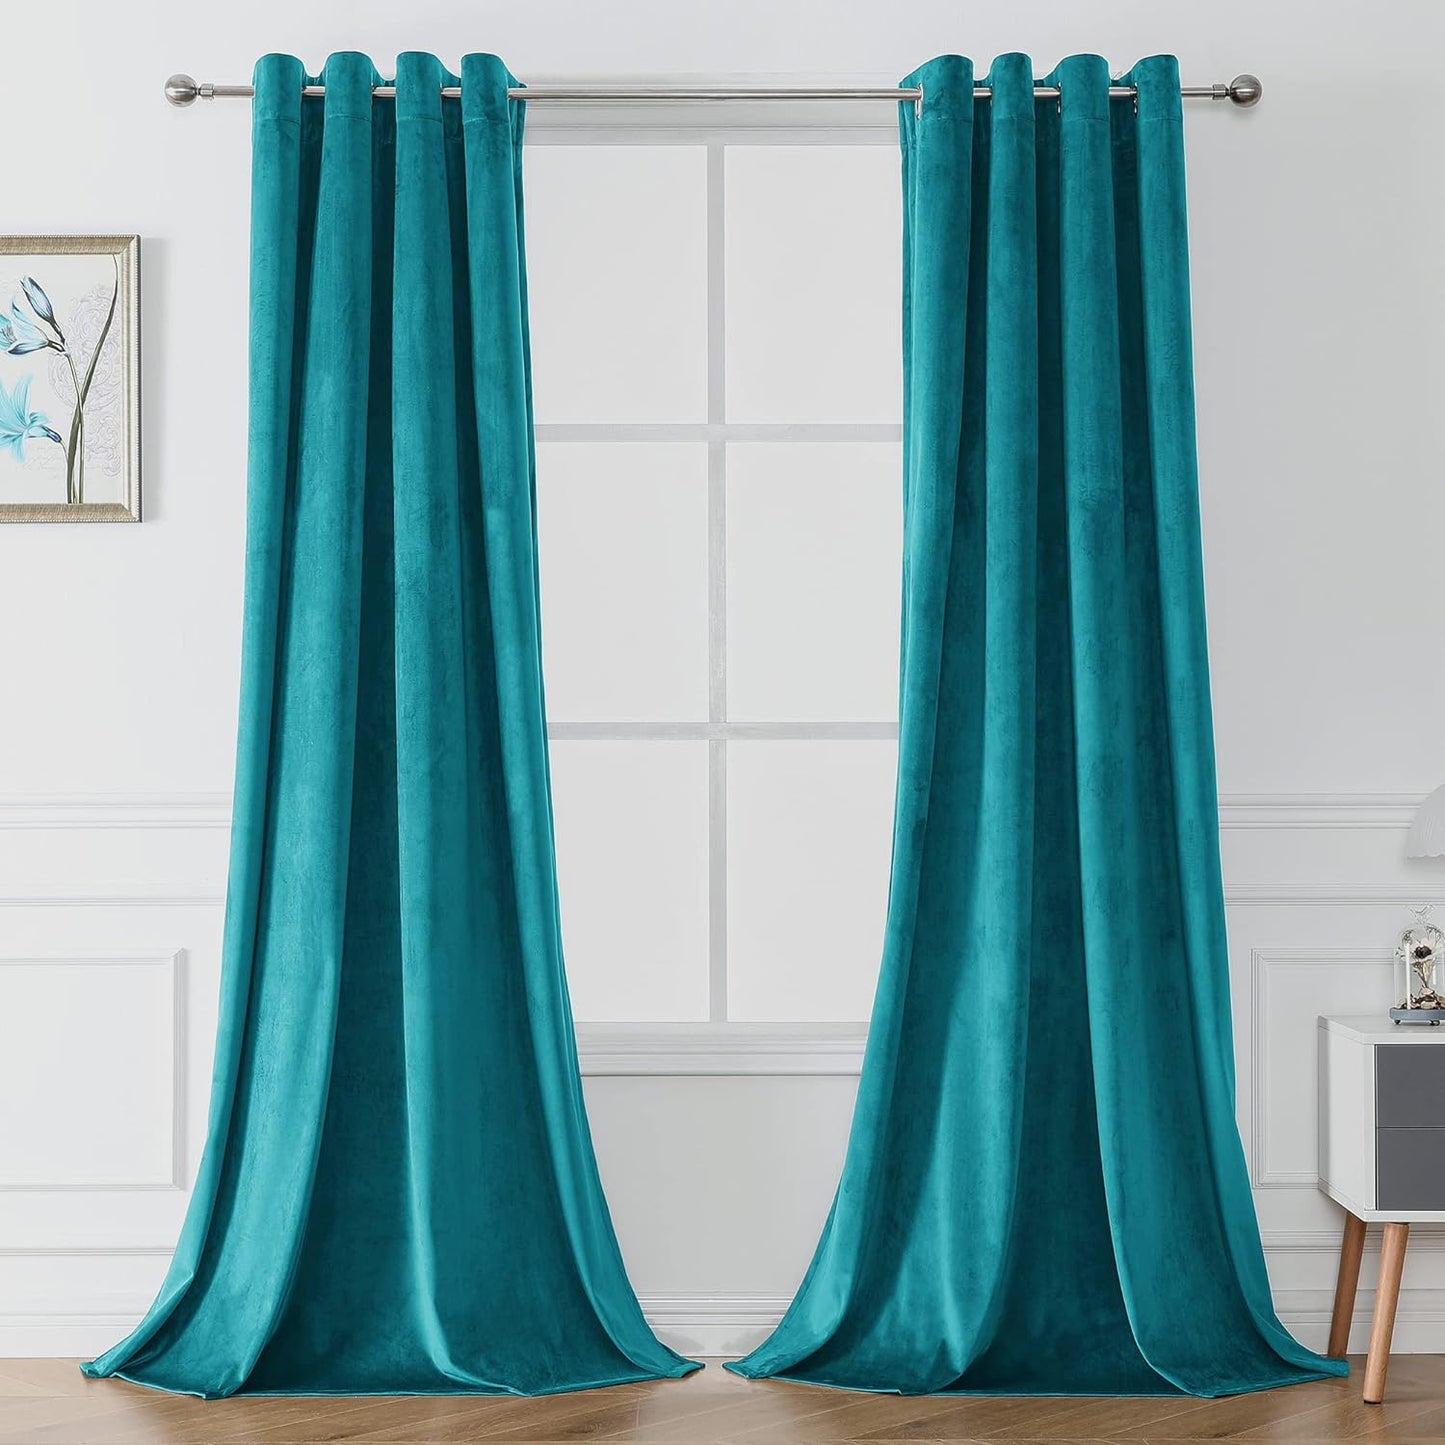 Victree Velvet Curtains for Bedroom, Blackout Curtains 52 X 84 Inch Length - Room Darkening Sun Light Blocking Grommet Window Drapes for Living Room, 2 Panels, Navy  Victree Teal Blue 52 X 108 Inches 